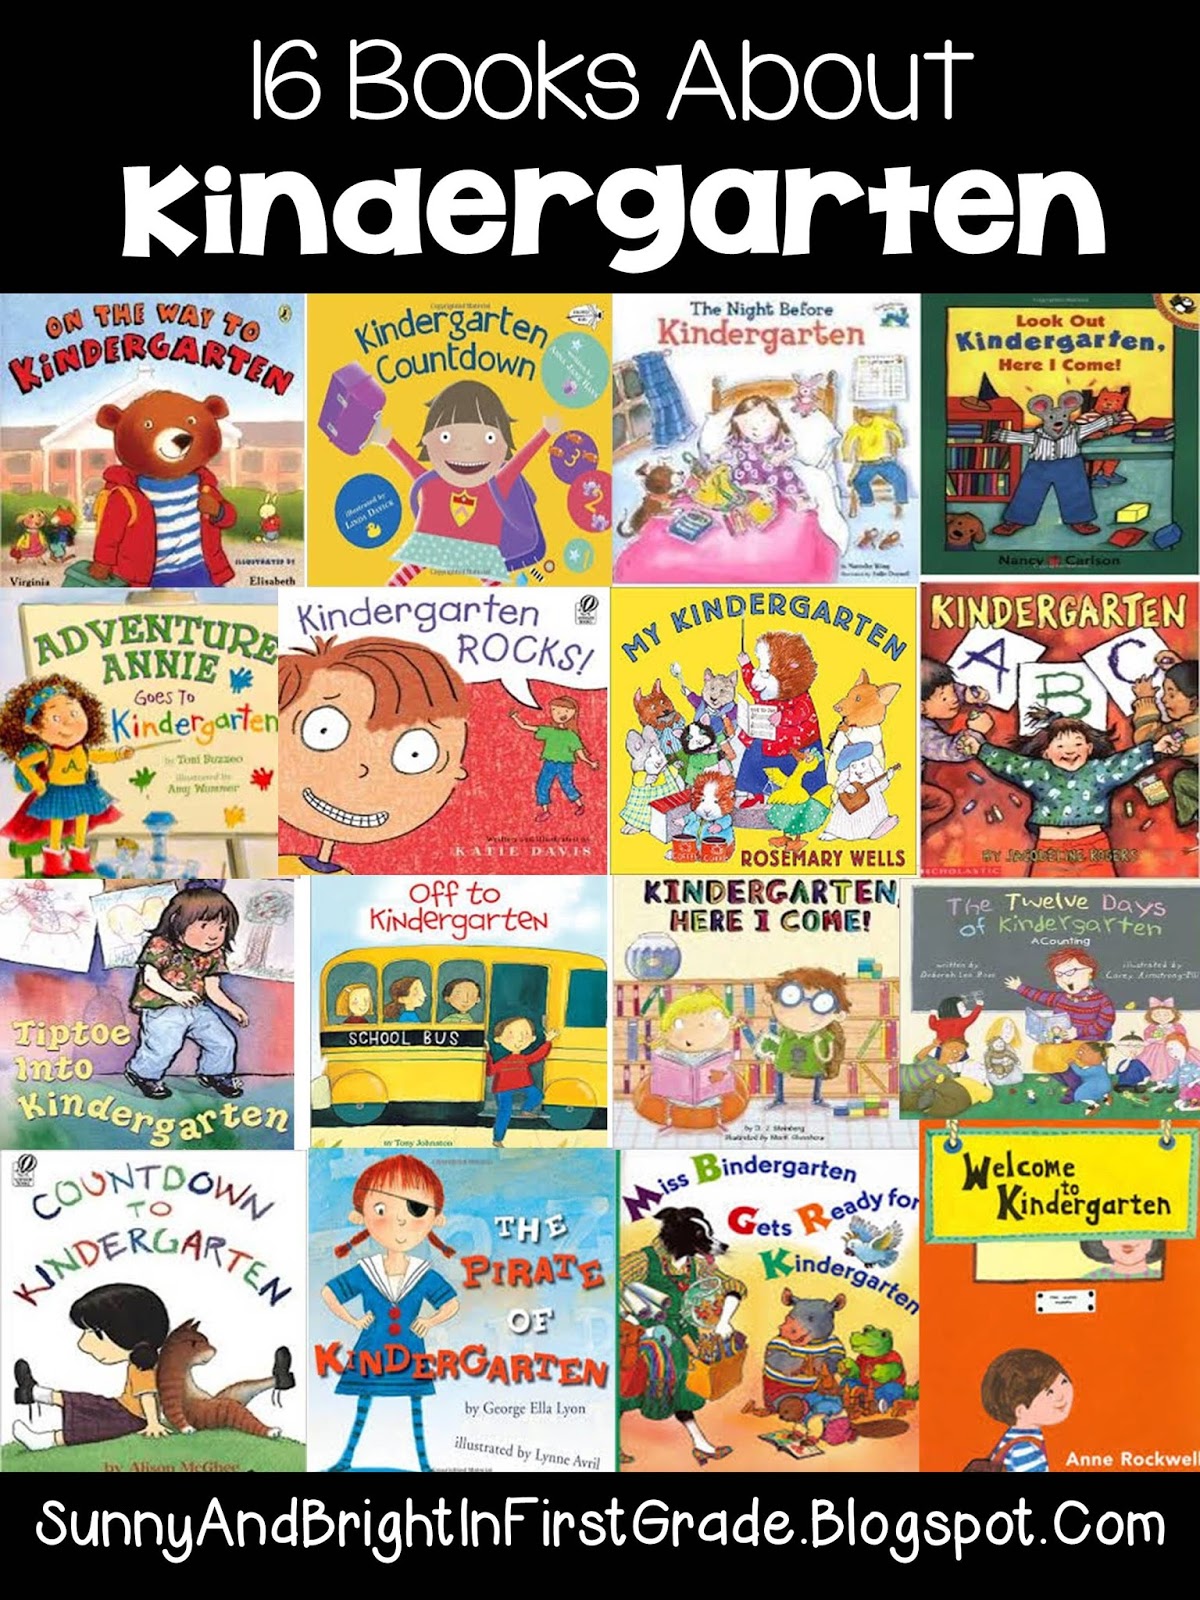 Sunny and Bright in First Grade: Books About Kindergarten